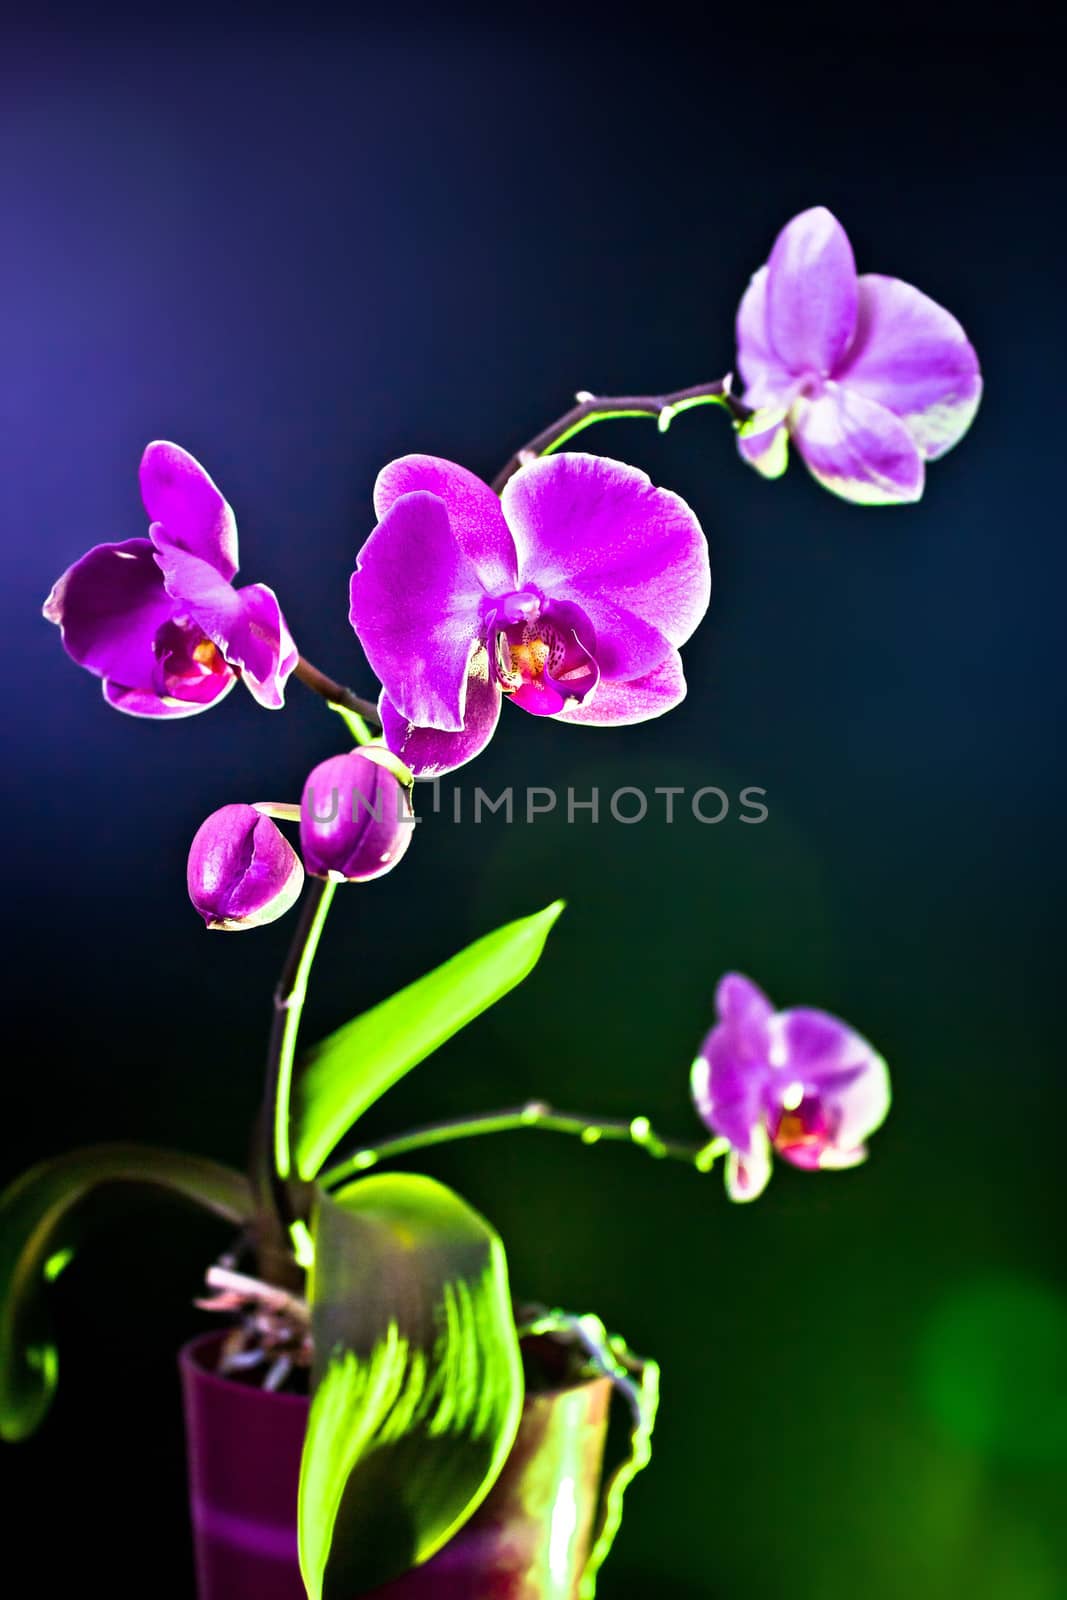 Orchid flower (phalaenopsis ambiance) view by xbrchx